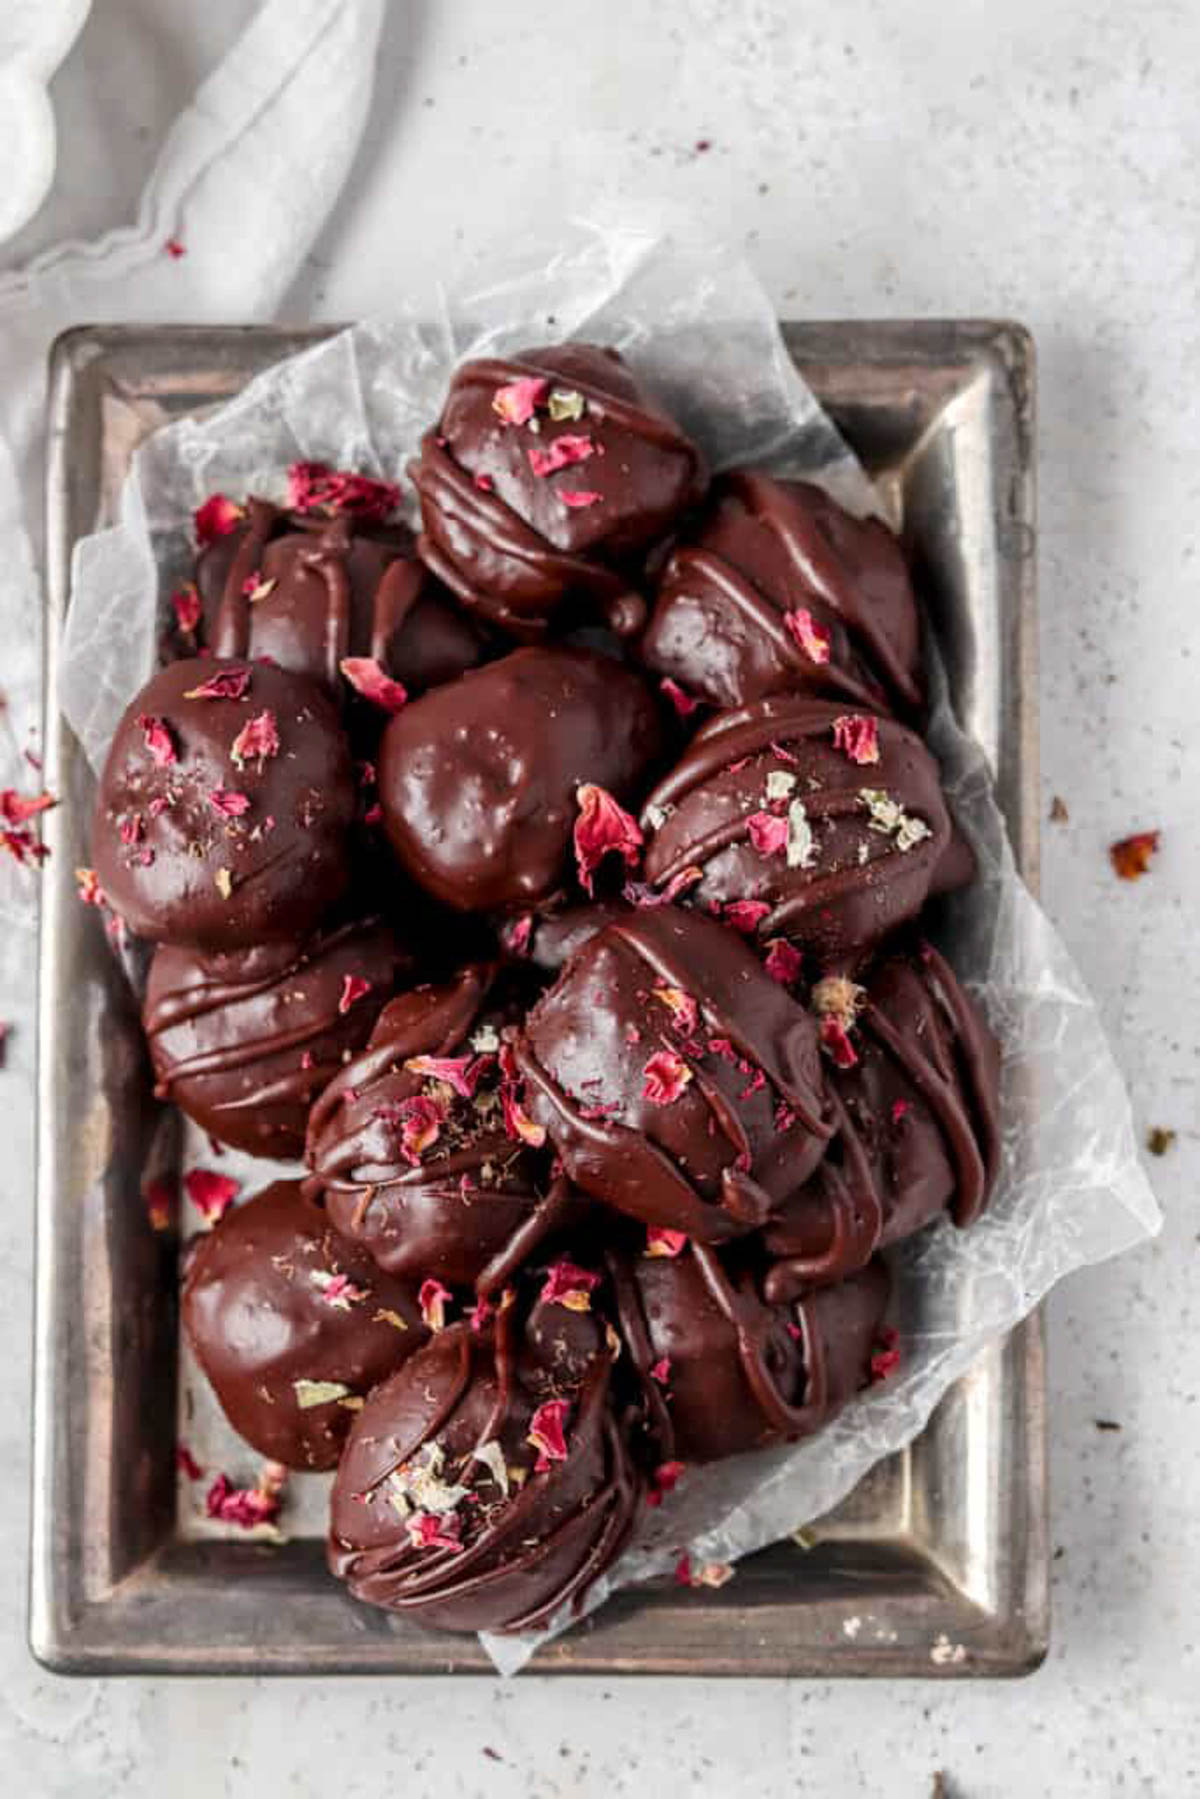 Vegan chocolate truffles stacked in metal tin with wax paper.